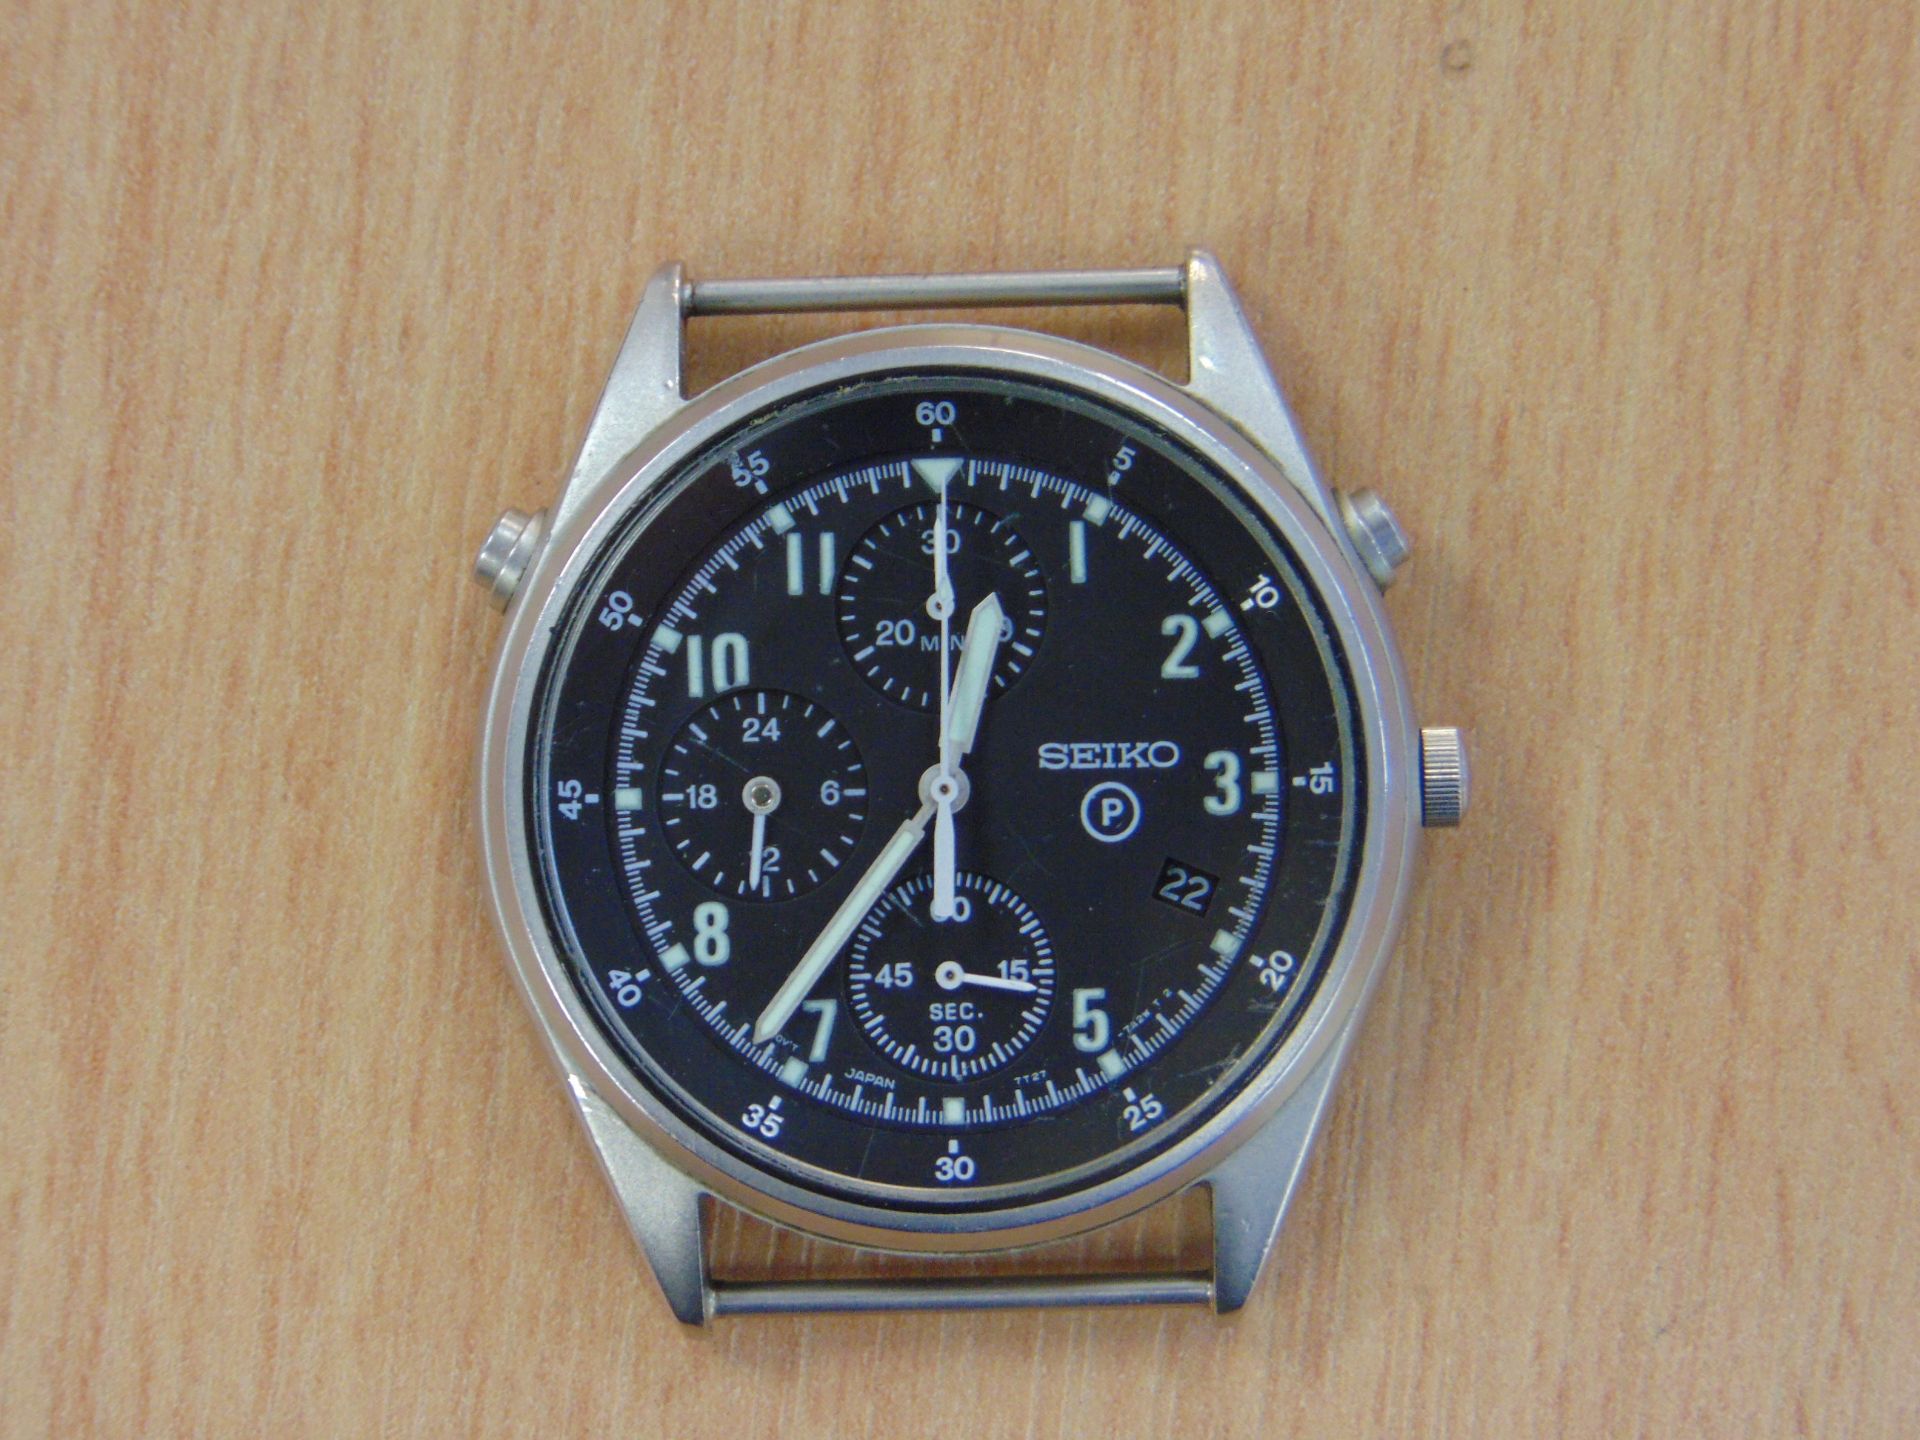 SEIKO GEN 2 RAF ISSUE PILOTS CHRONO WATCH NATO MARKINGS DATED 1997 - Image 4 of 9